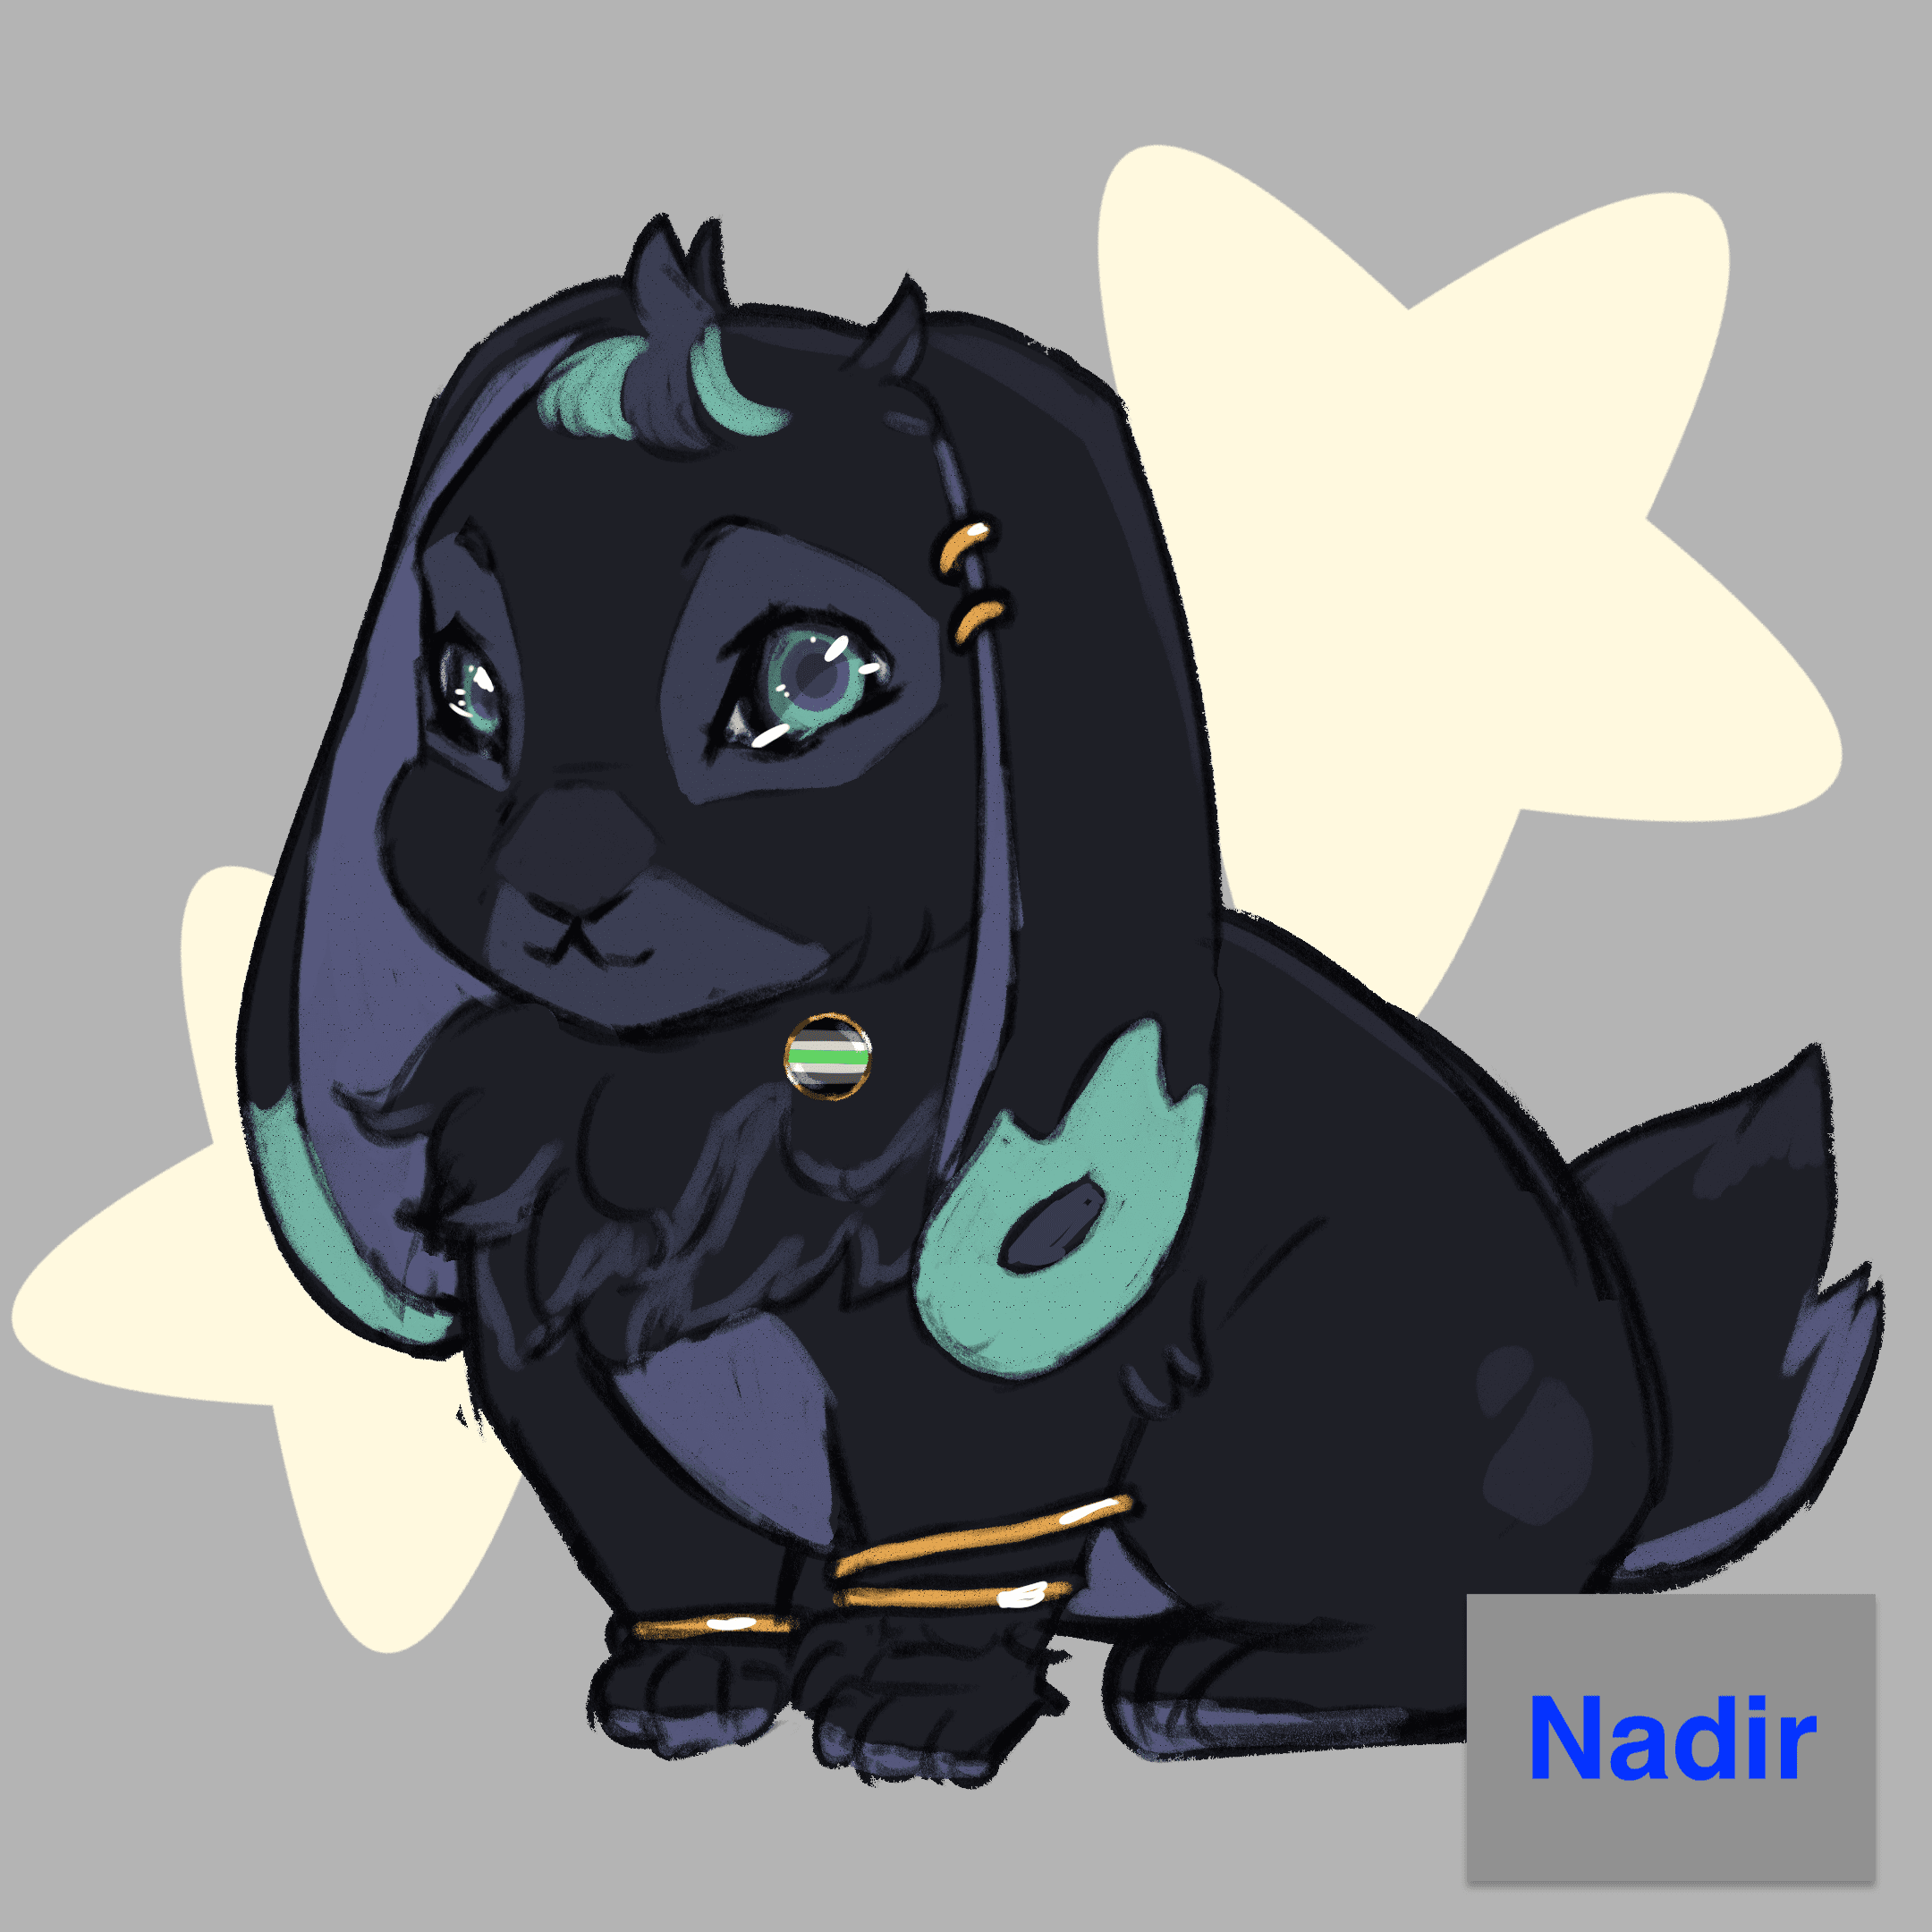 A dark long eared bunny with blue spots and golden bands and earrings